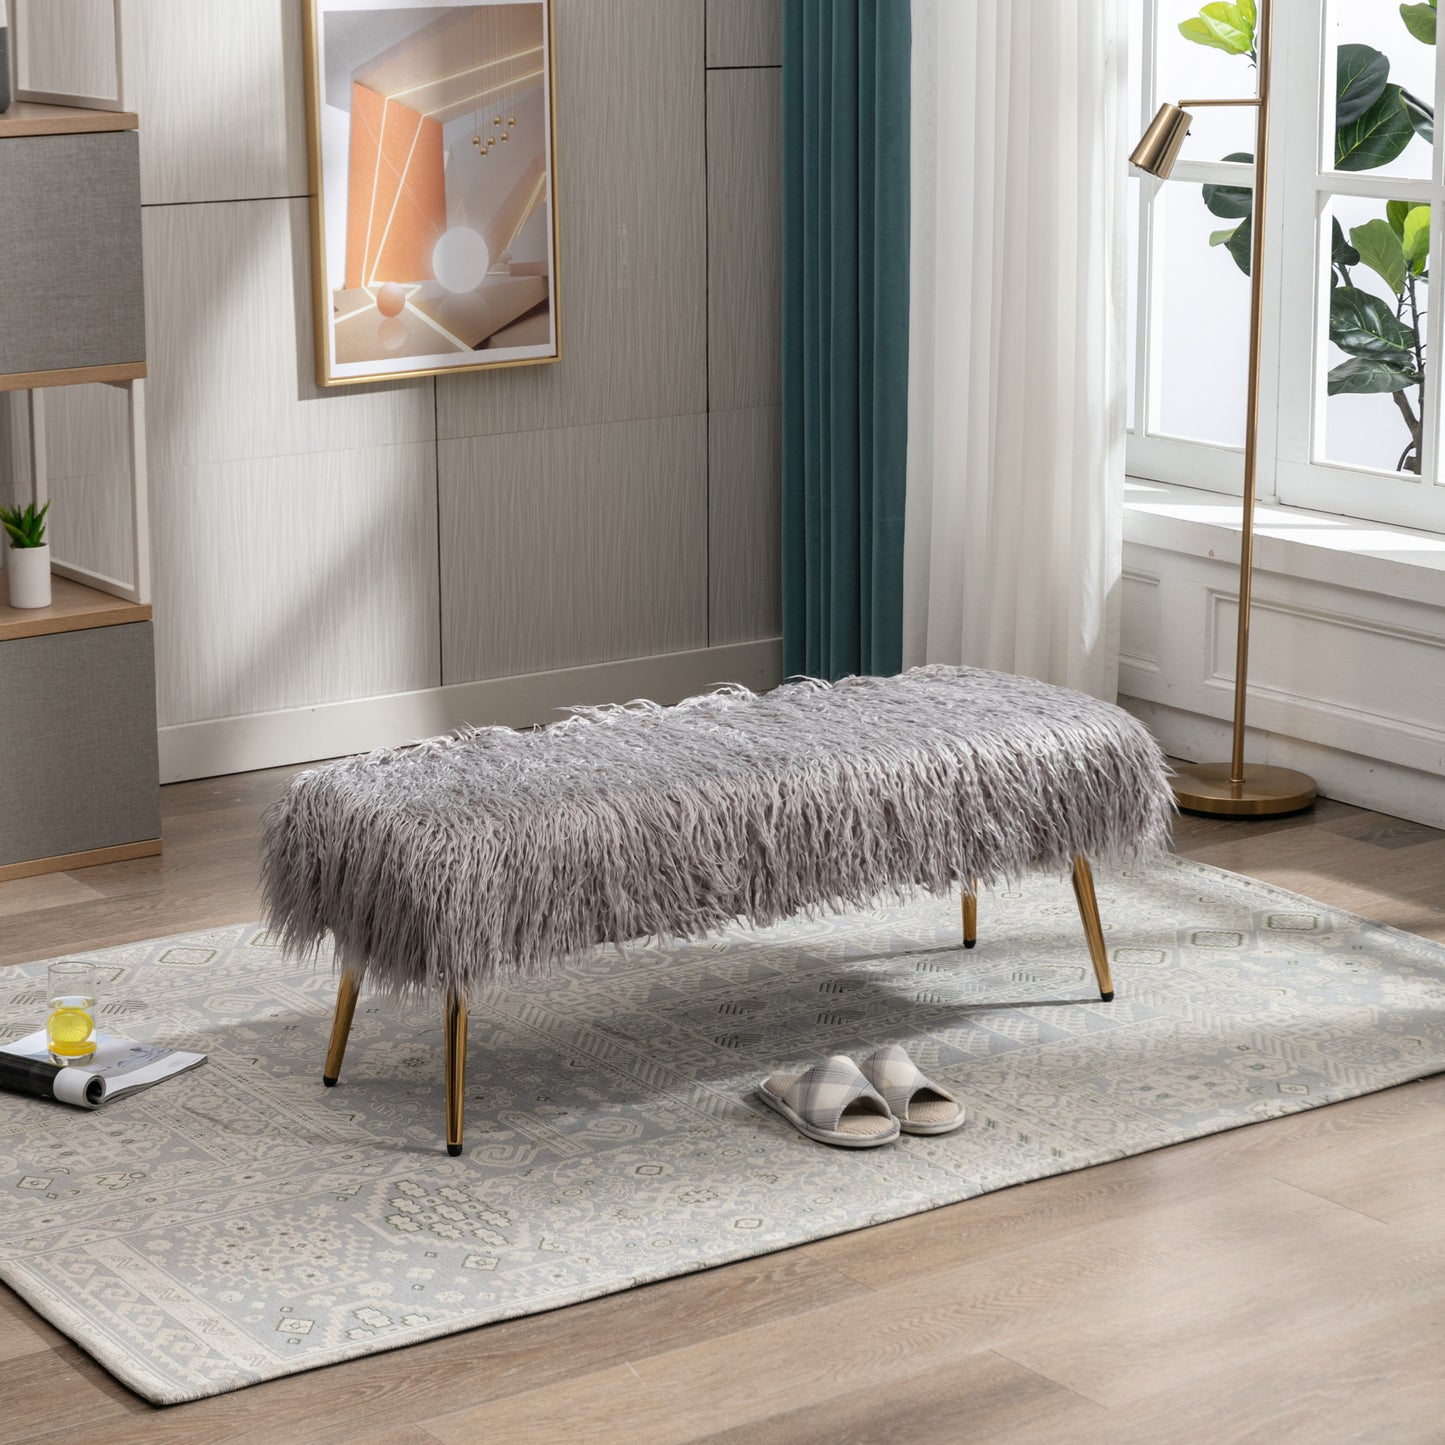 HengMing Faux Fur Plush Ottoman Bench, Modern Fluffy Upholstered Bench for Entryway Dining Room Living Room Bedroom, GRAY